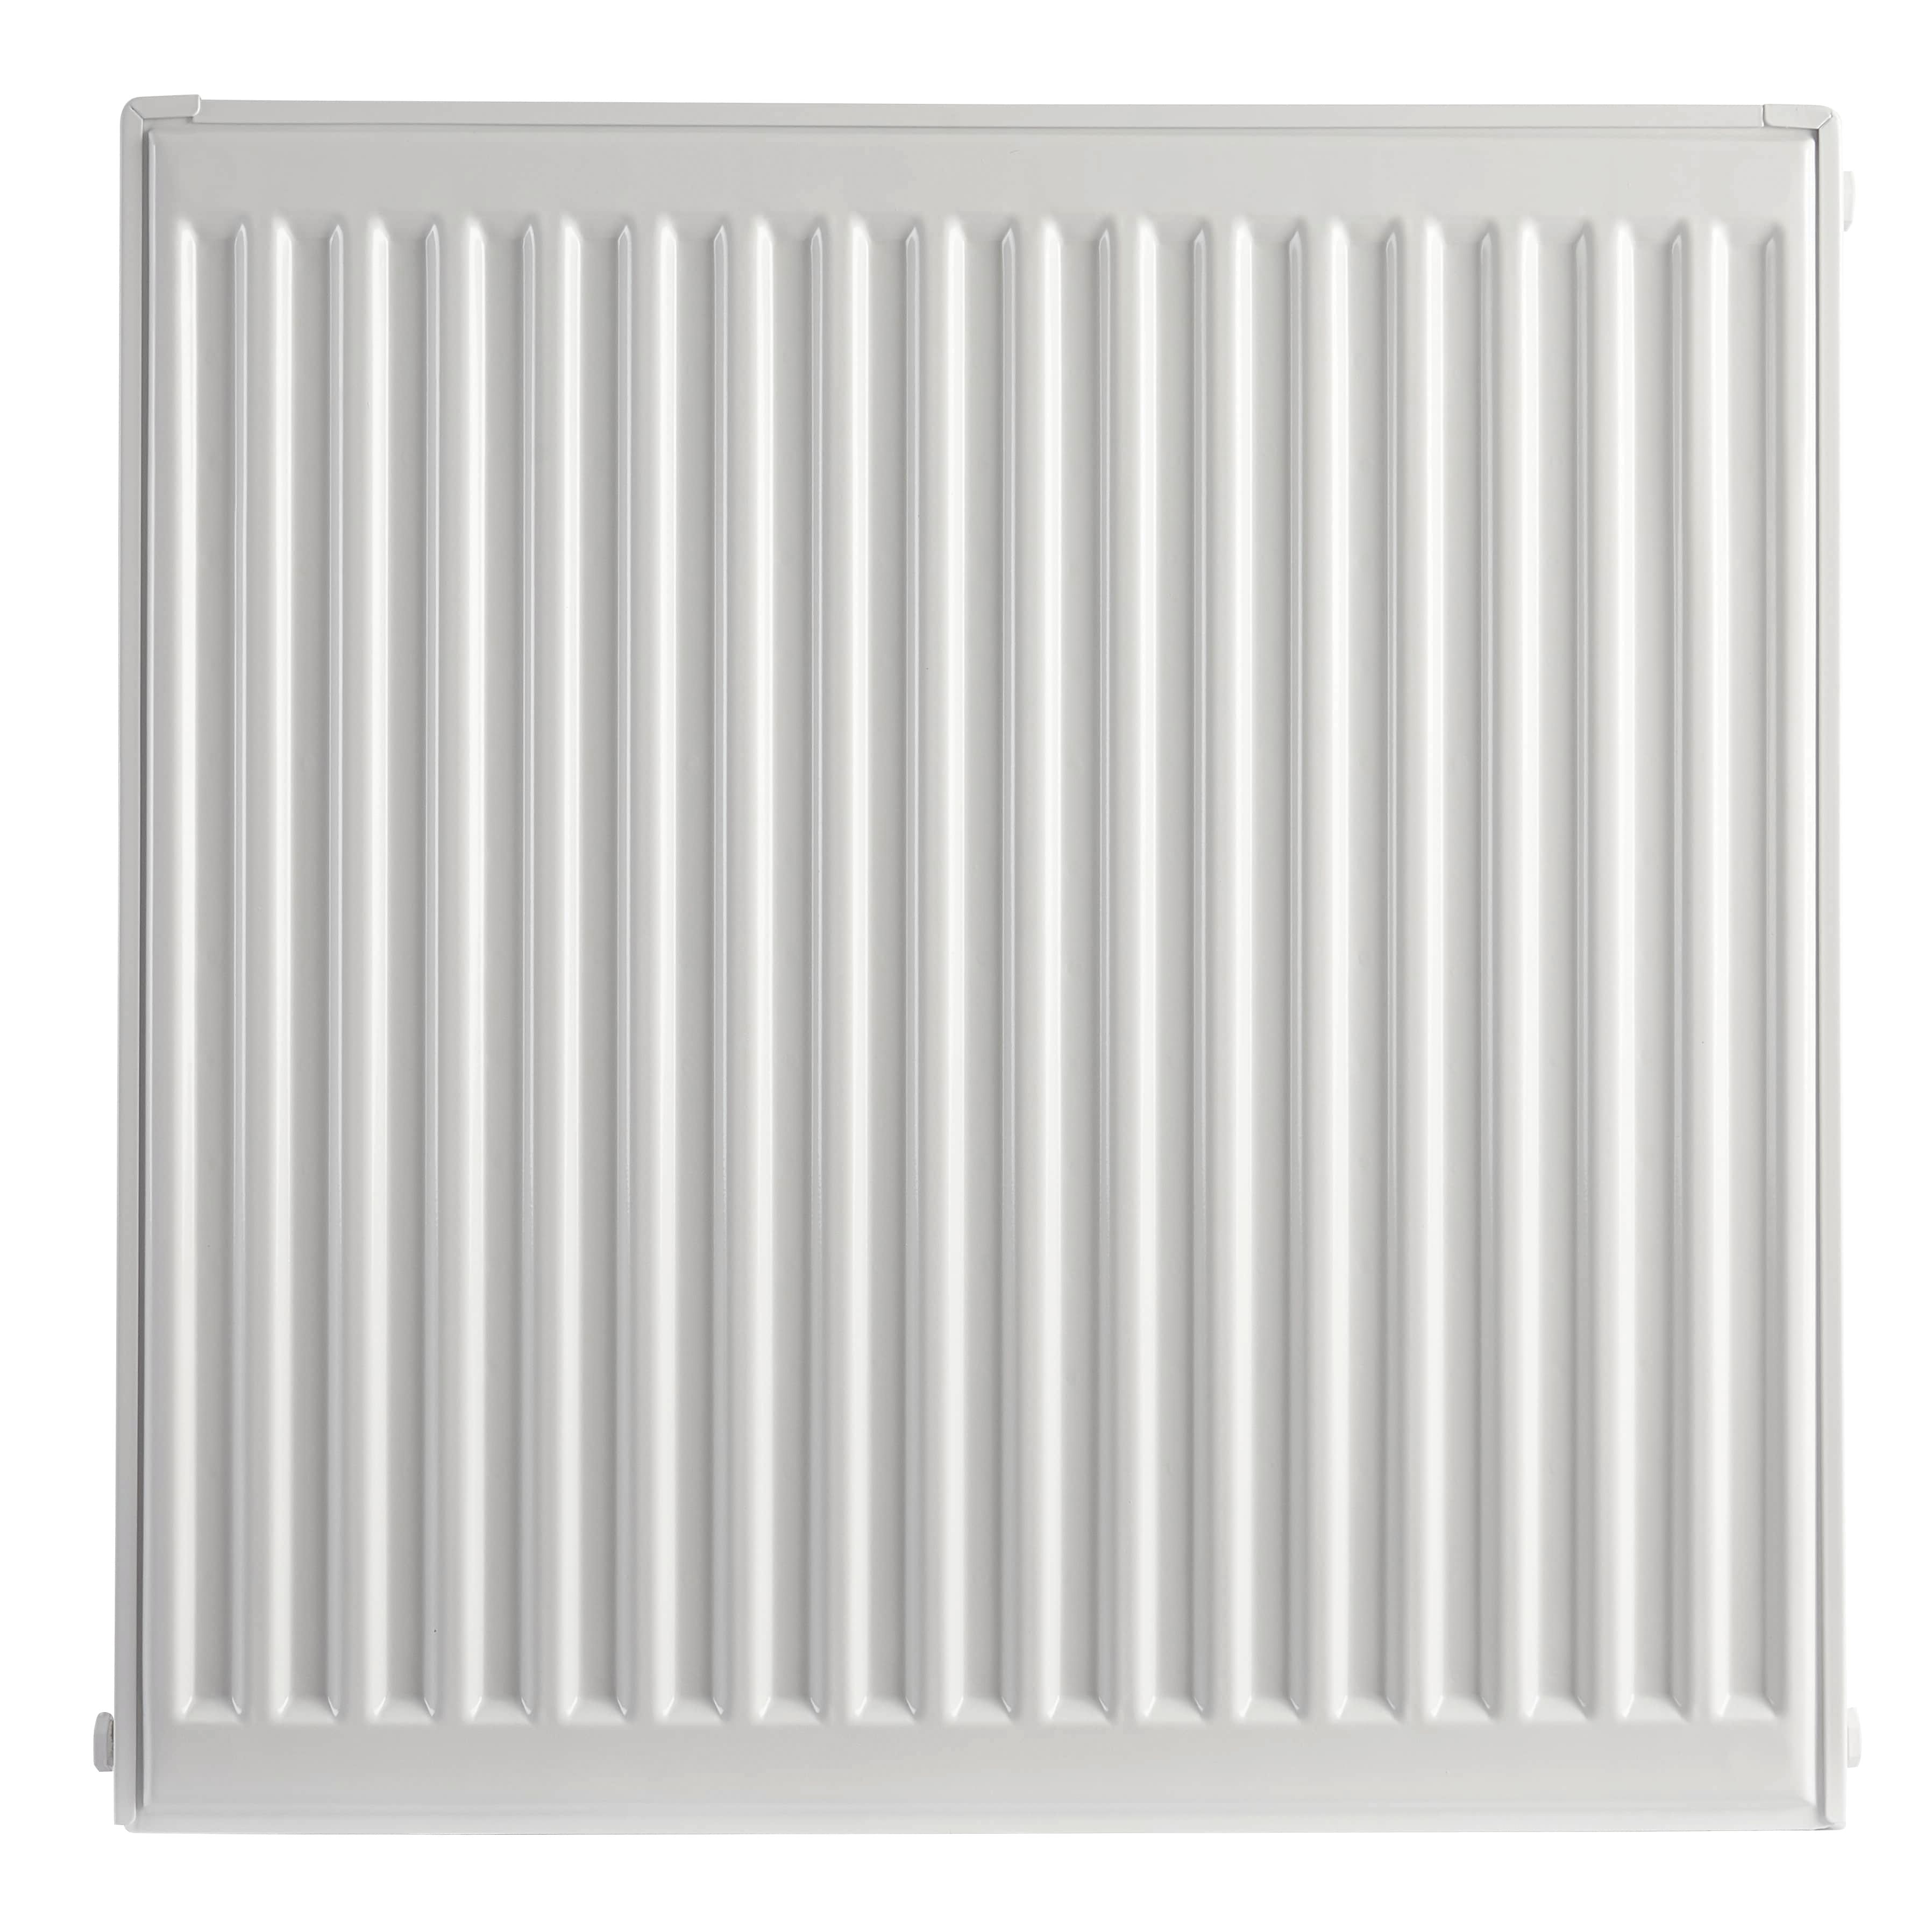 Image of Homeline by Stelrad 500 x 500mm Type 21 Double Panel Plus Single Convector Radiator